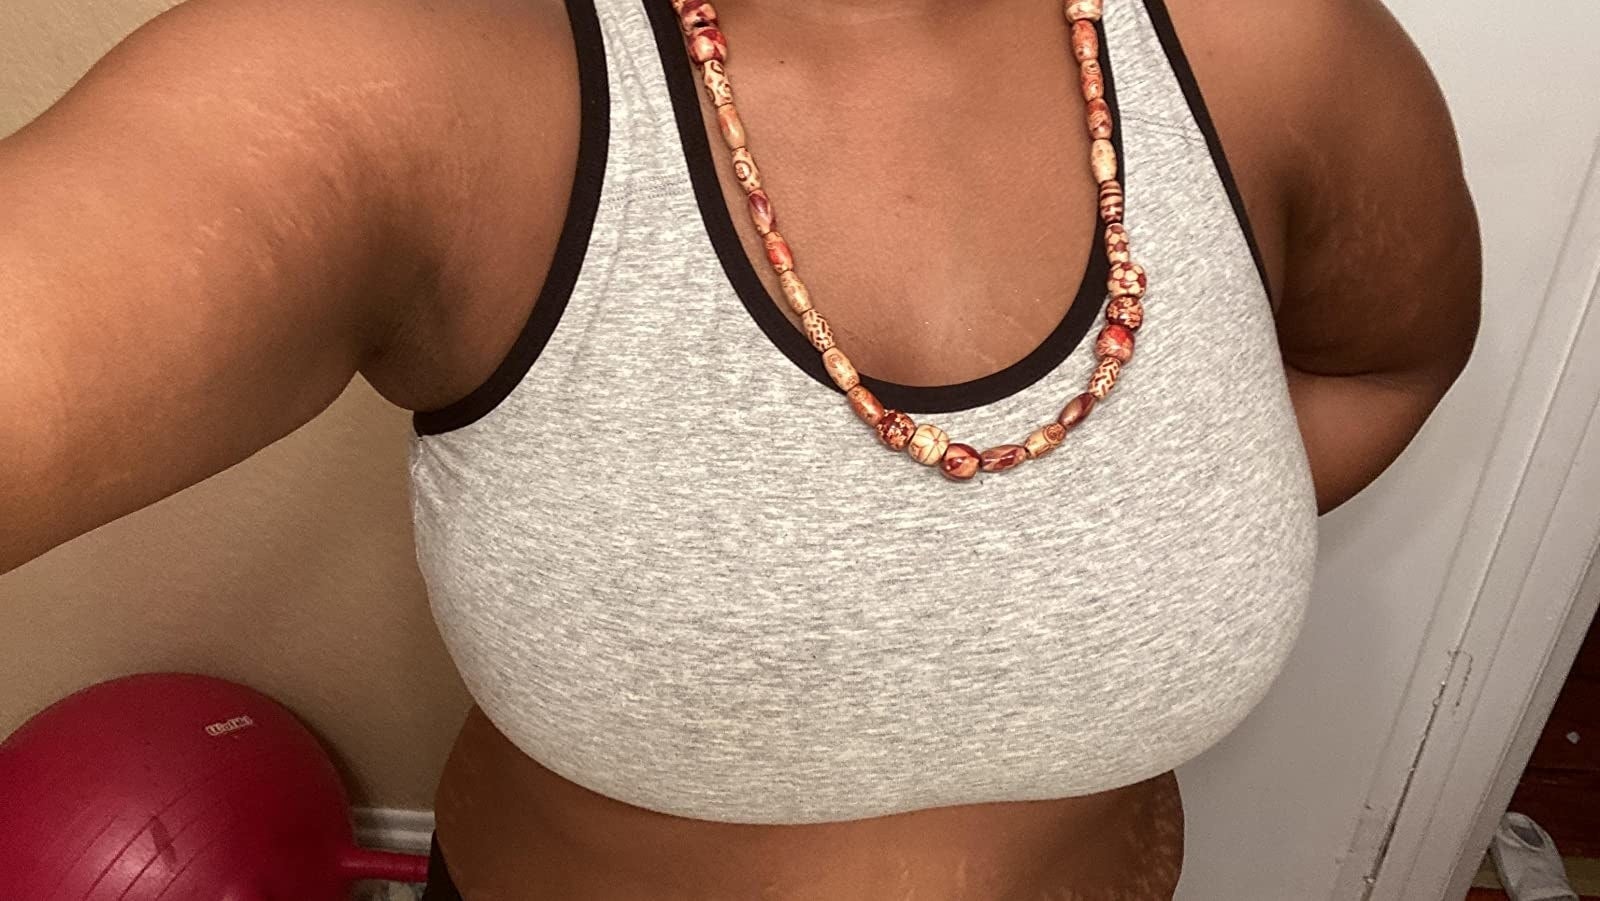 sports bras making me cry actually (rant is in comments) : r/bigboobproblems